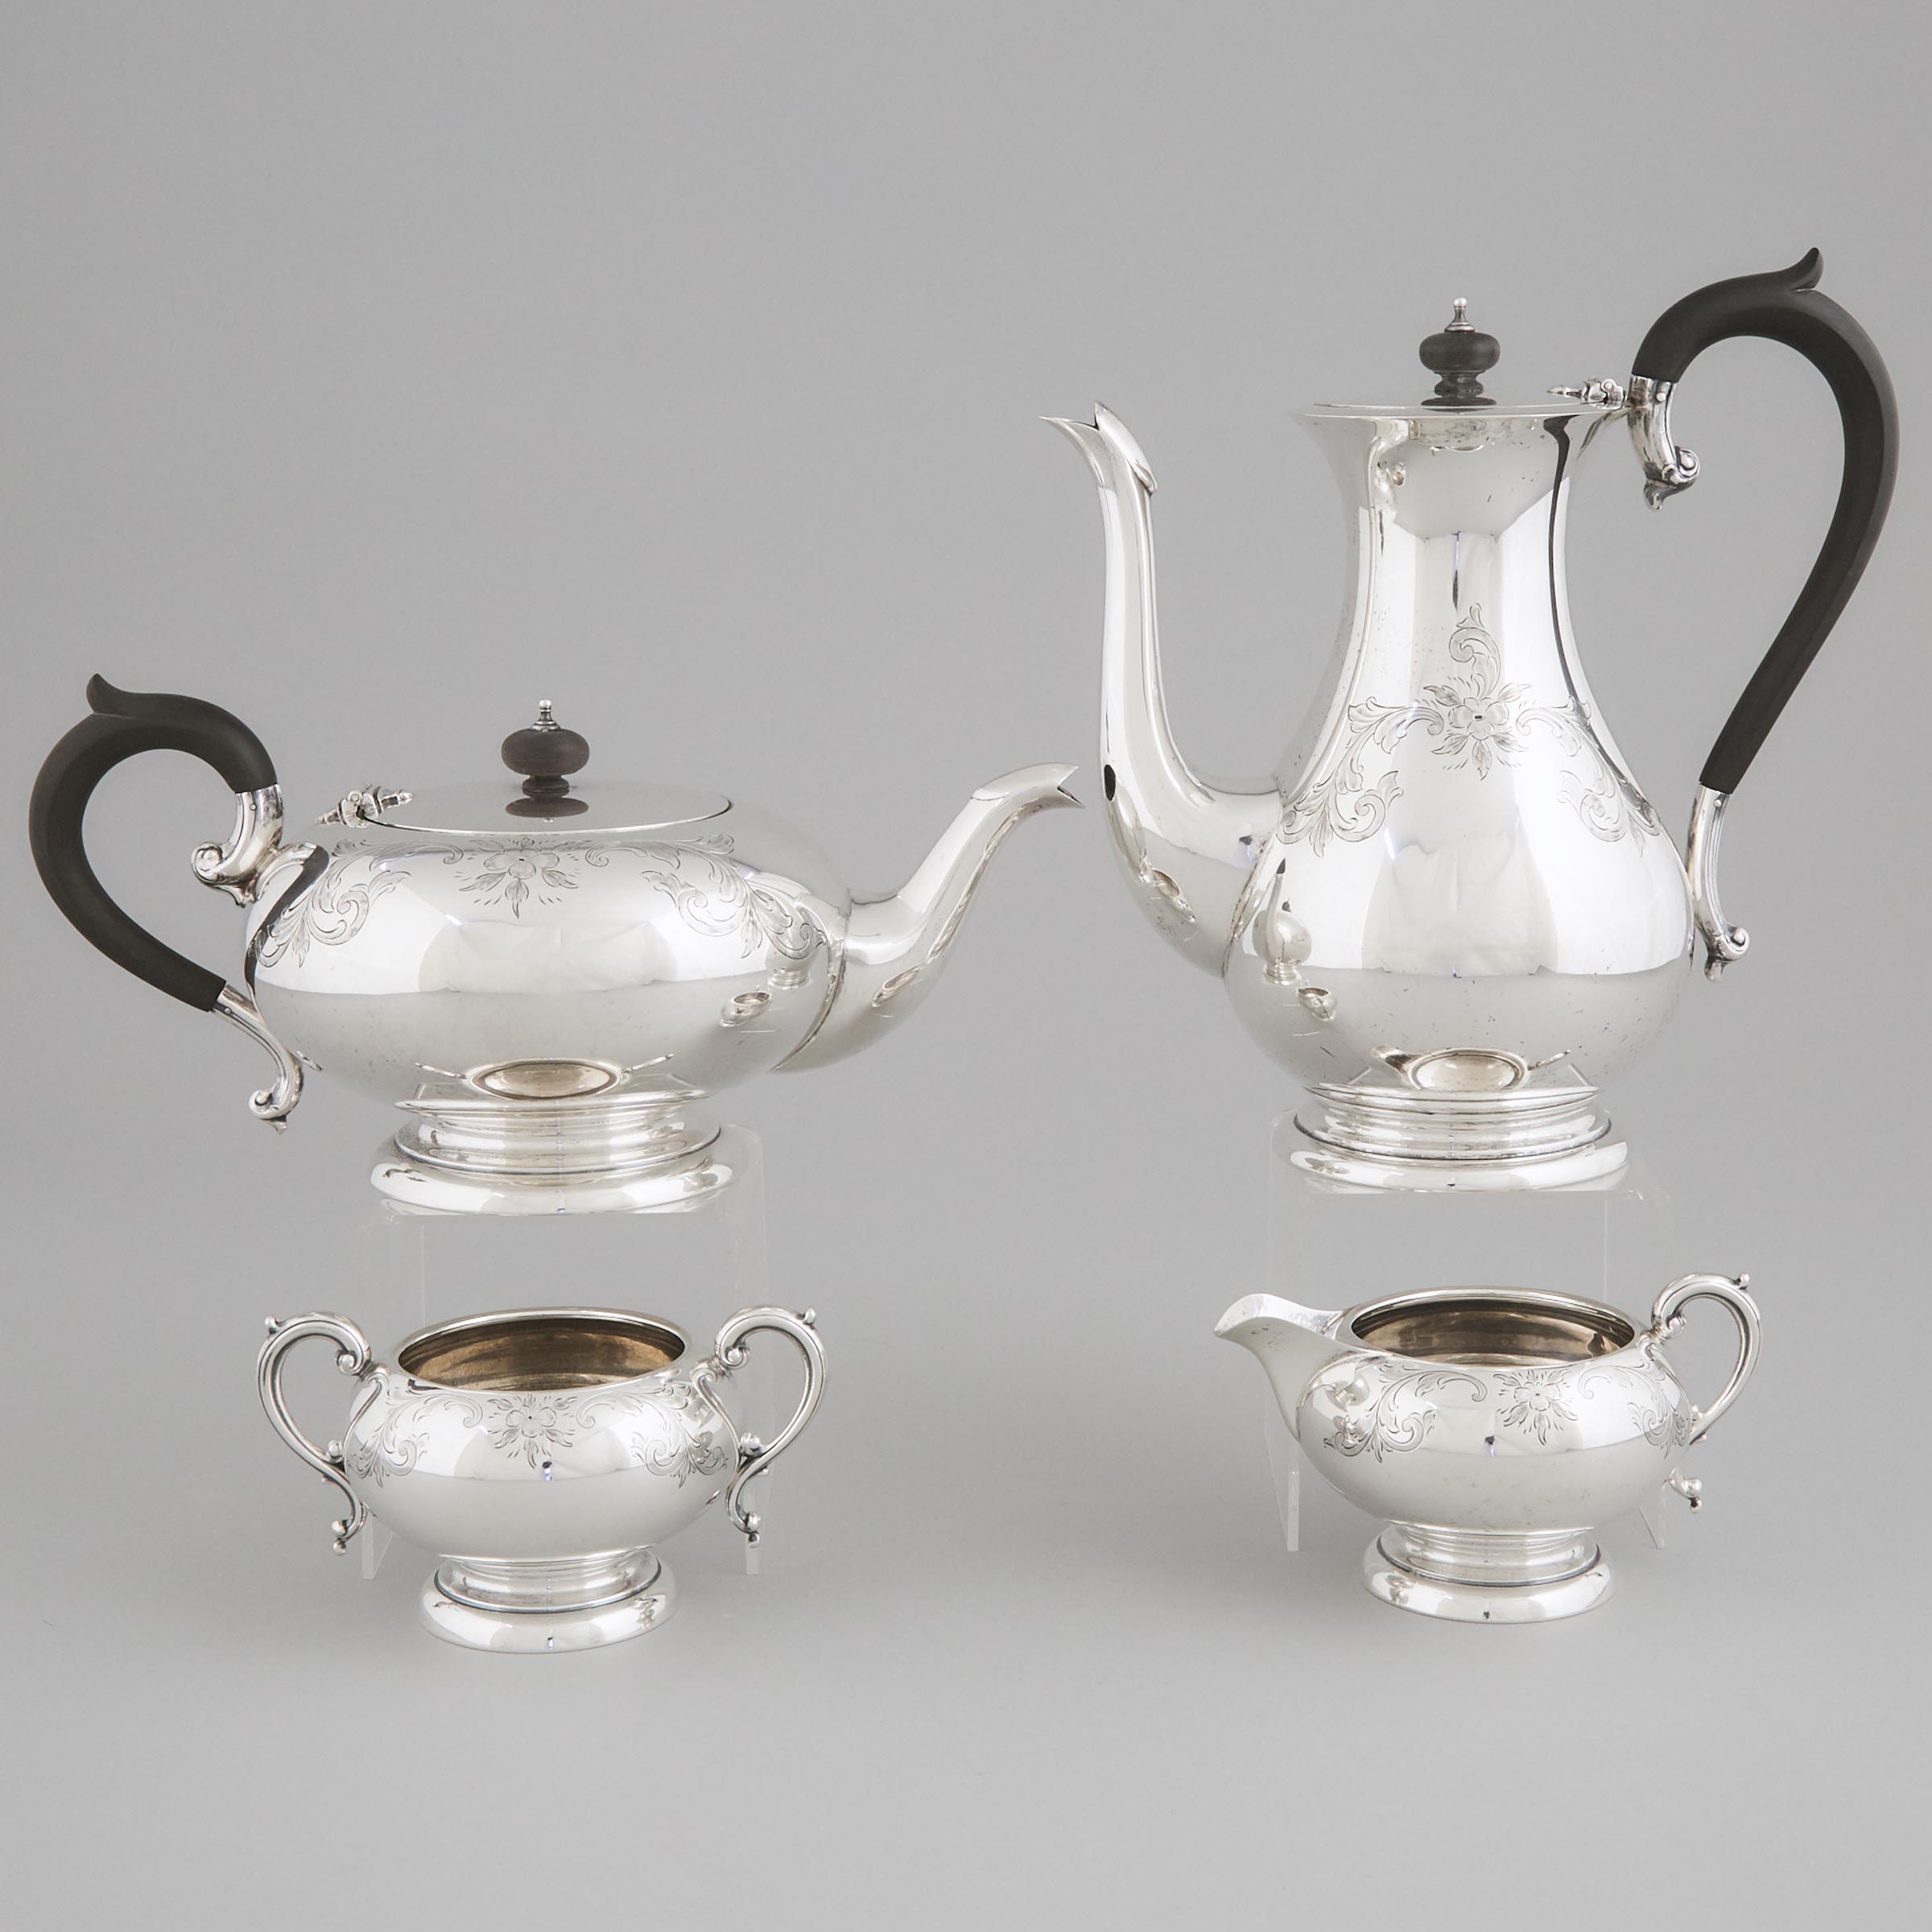 Canadian Silver Tea and Coffee Service, Henry Birks & Sons, Montreal, Que., 1958-60